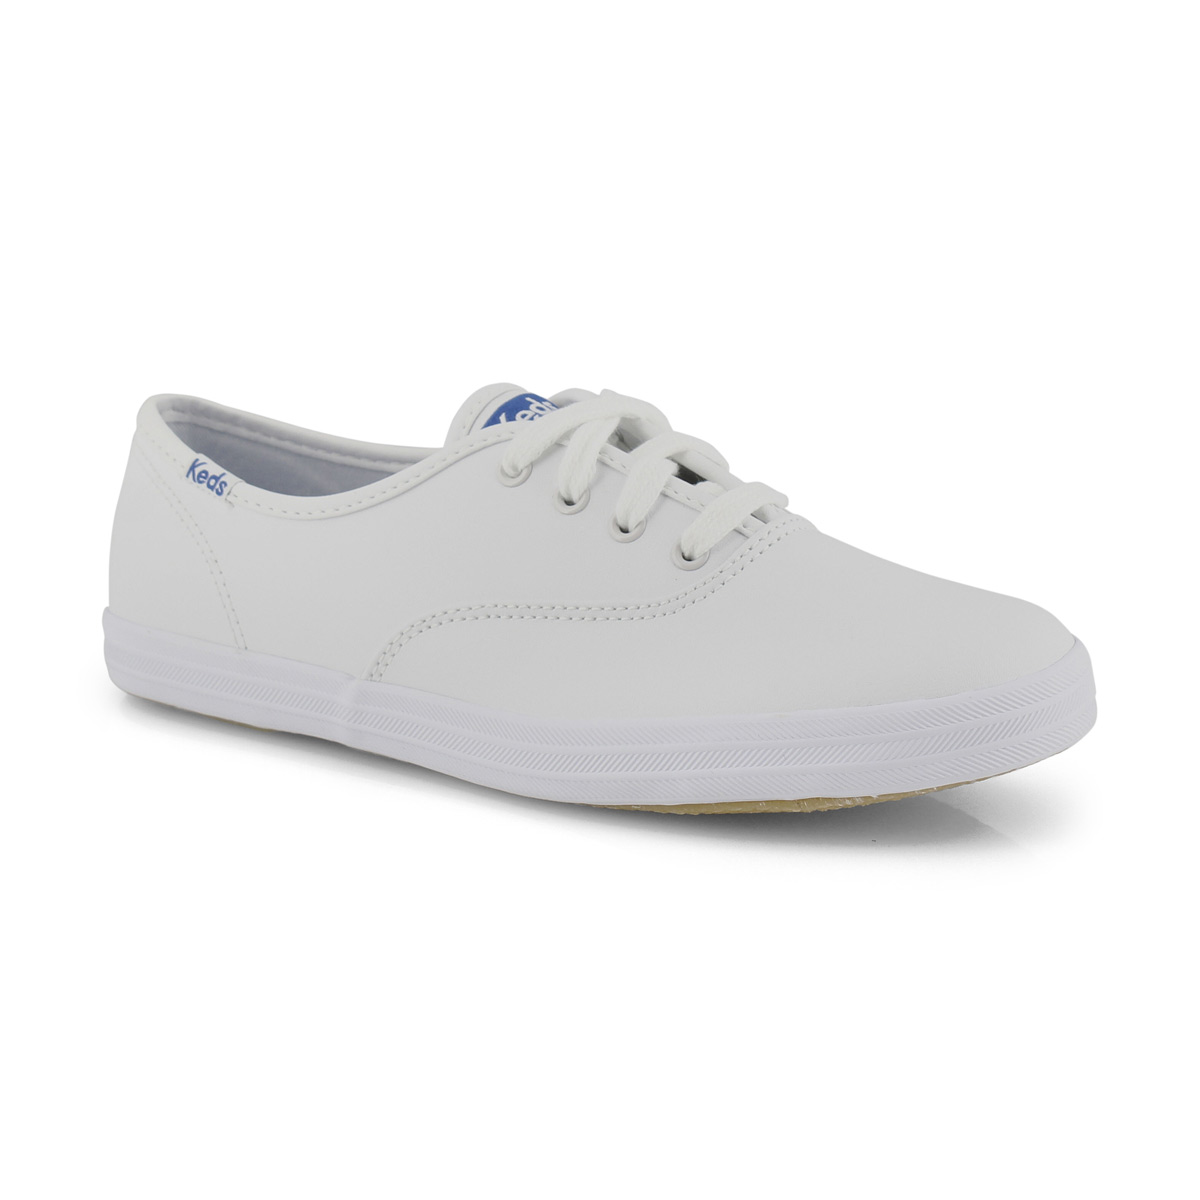 Keds Kids' CHAMPION white leather sneakers | SoftMoc.com